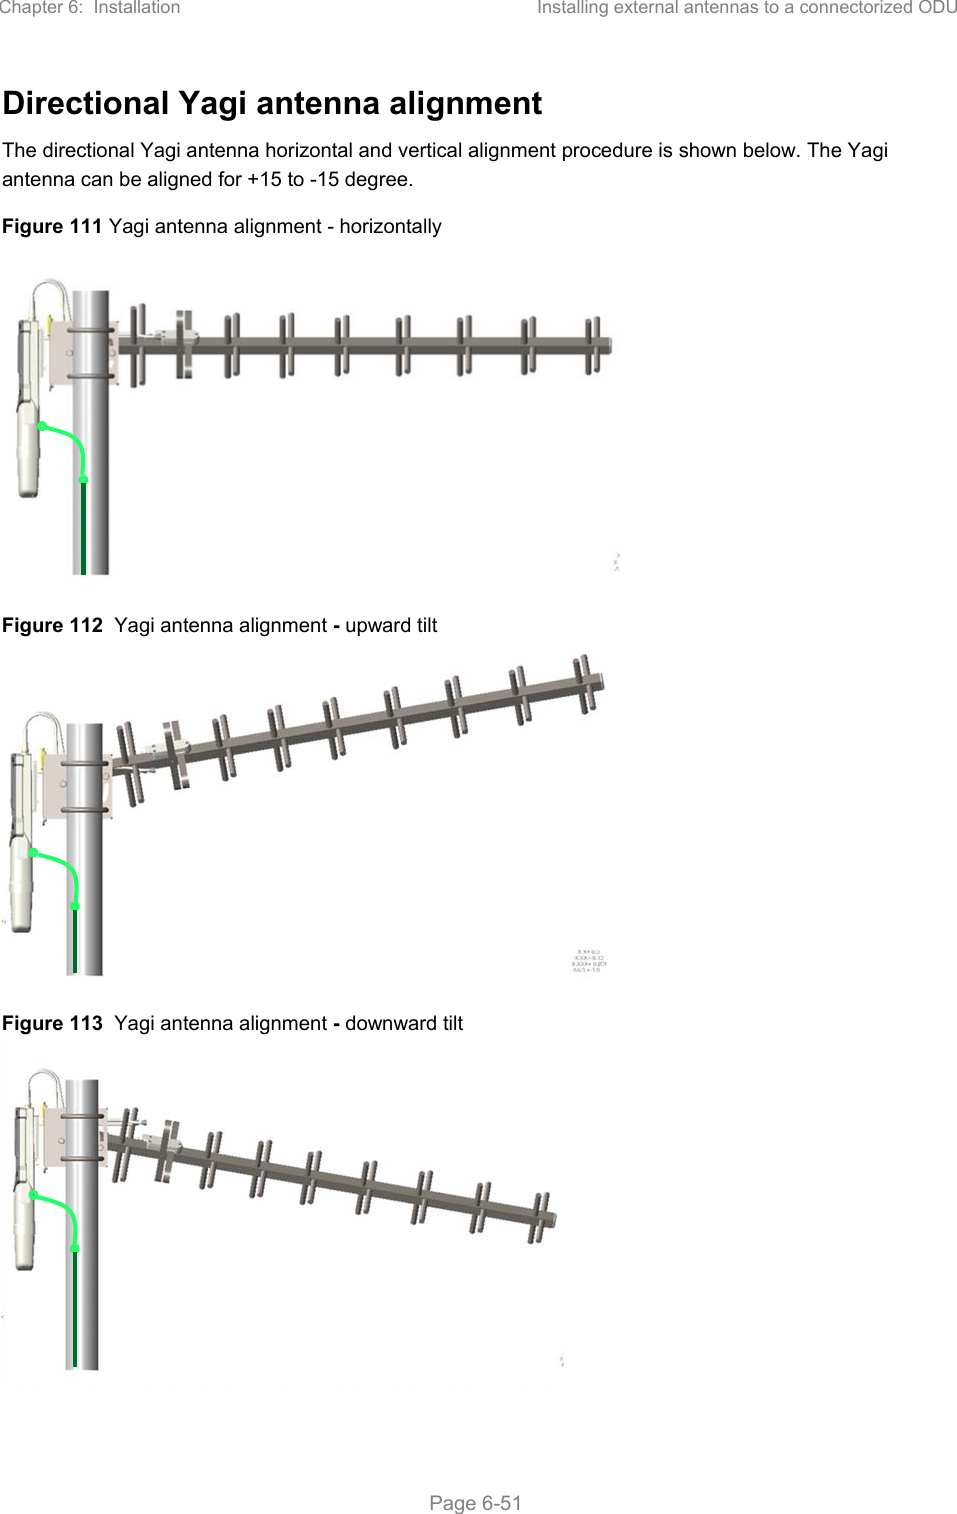 Chapter 6:  Installation  Installing external antennas to a connectorized ODU   Page 6-51 Directional Yagi antenna alignment  The directional Yagi antenna horizontal and vertical alignment procedure is shown below. The Yagi antenna can be aligned for +15 to -15 degree. Figure 111 Yagi antenna alignment - horizontally  Figure 112  Yagi antenna alignment - upward tilt  Figure 113  Yagi antenna alignment - downward tilt  